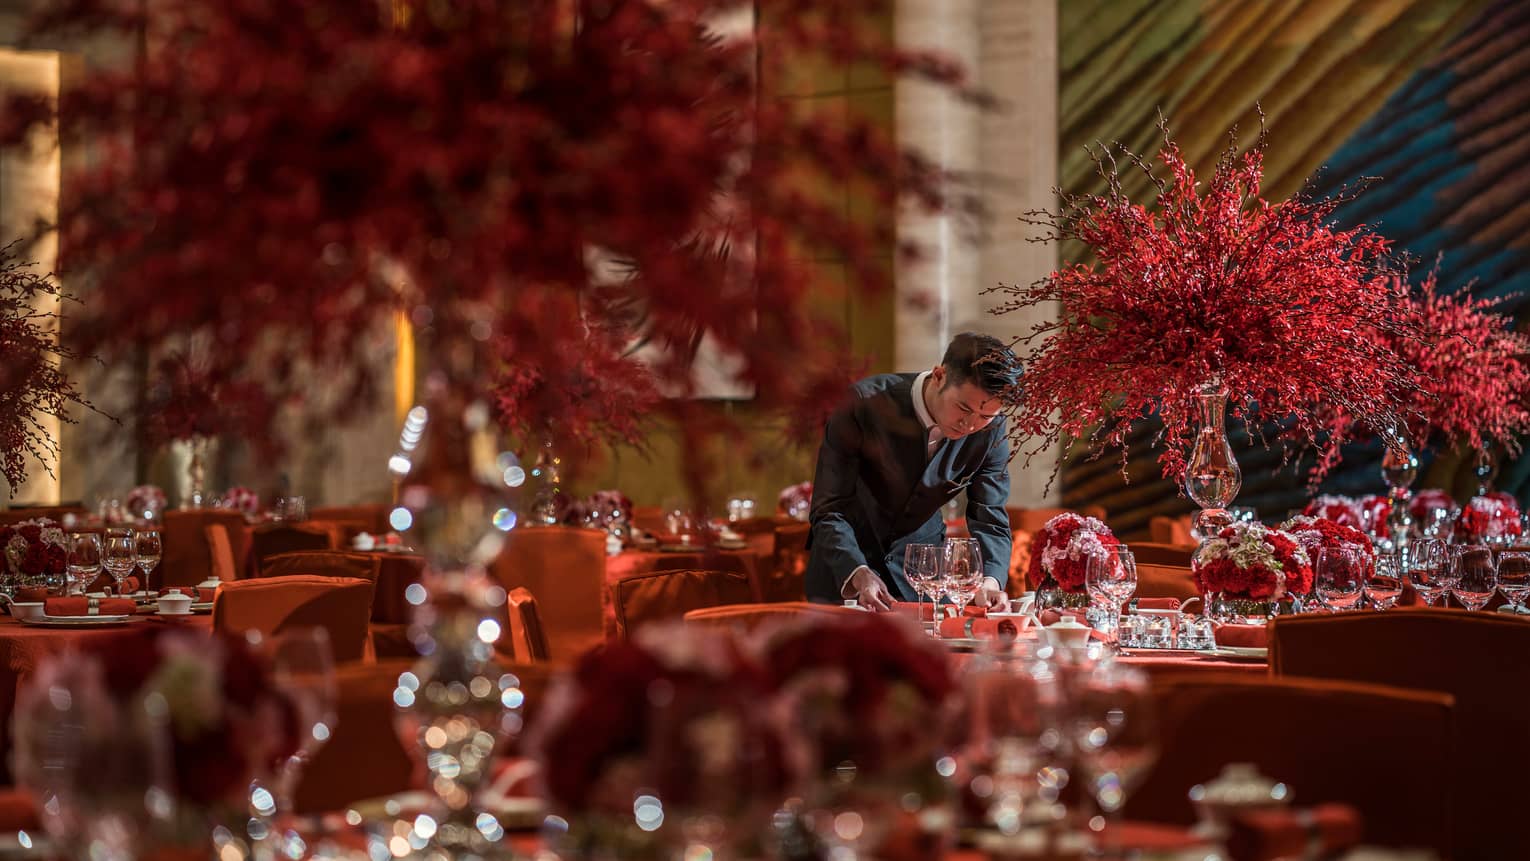 Hotel staff sets banquet tables with large red flower arrangements